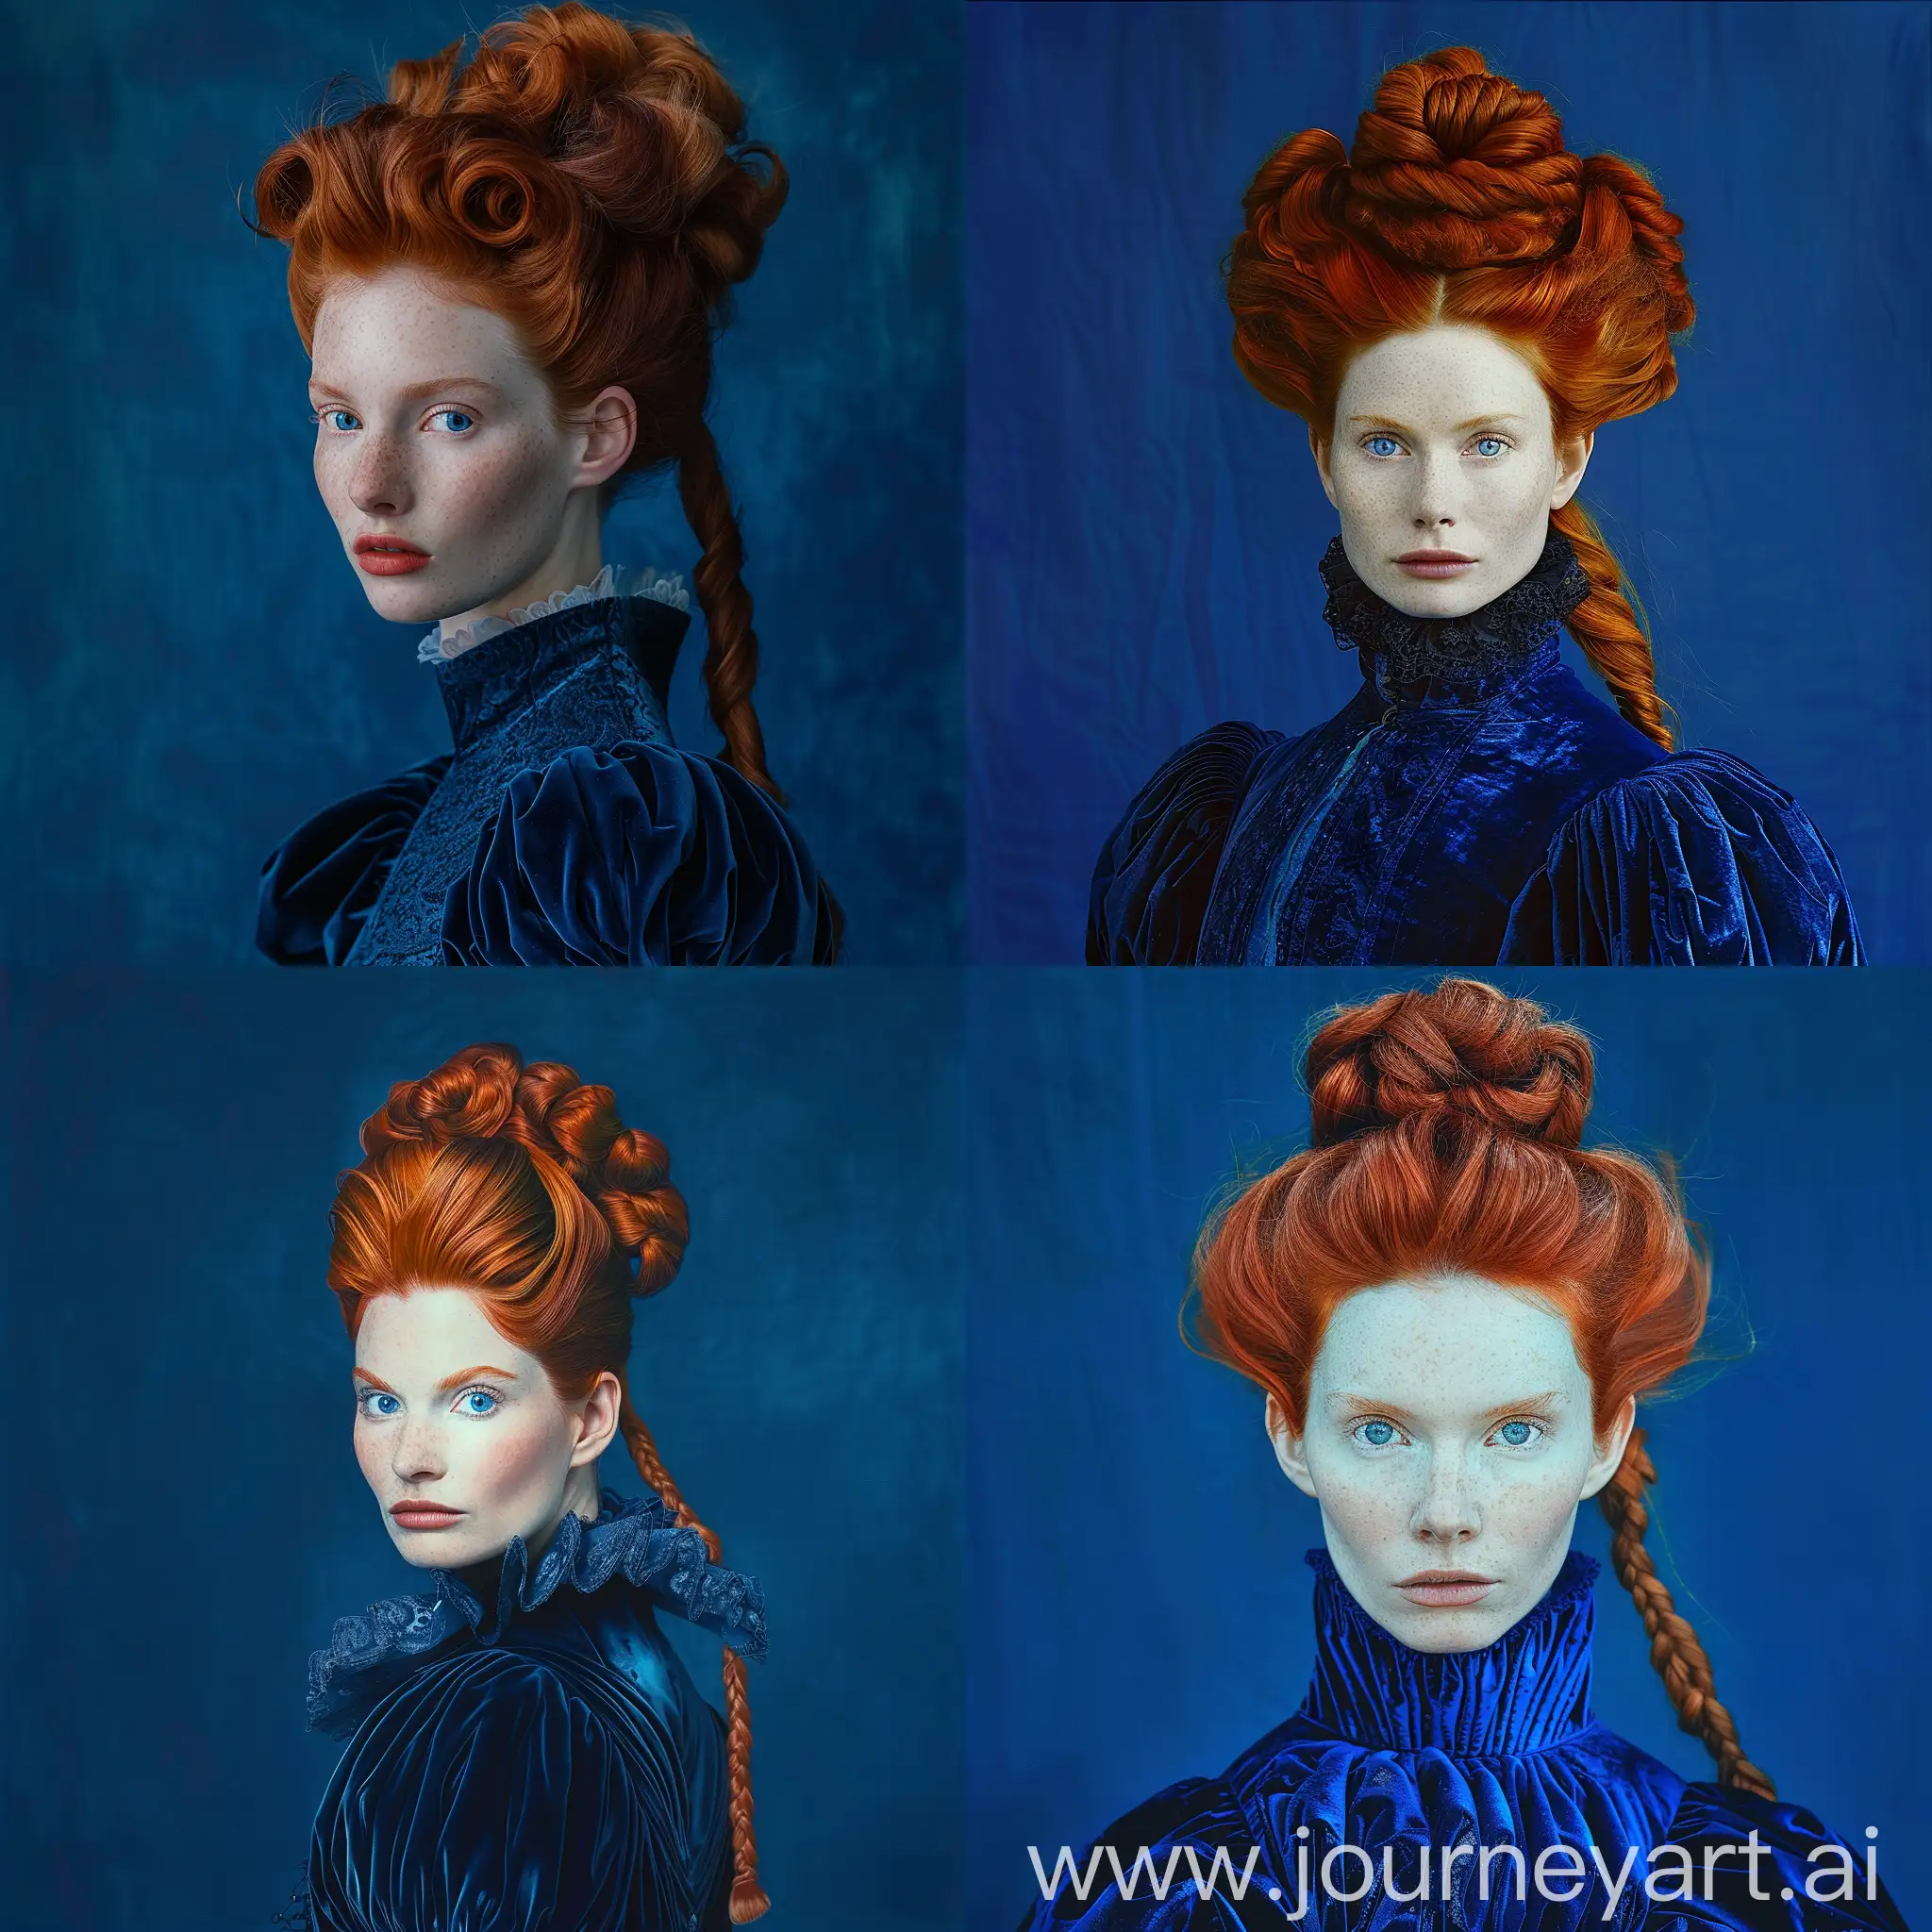 Dramatic-Portrait-of-a-RedHaired-Elizabethan-Woman-in-Dark-Blue-Costume